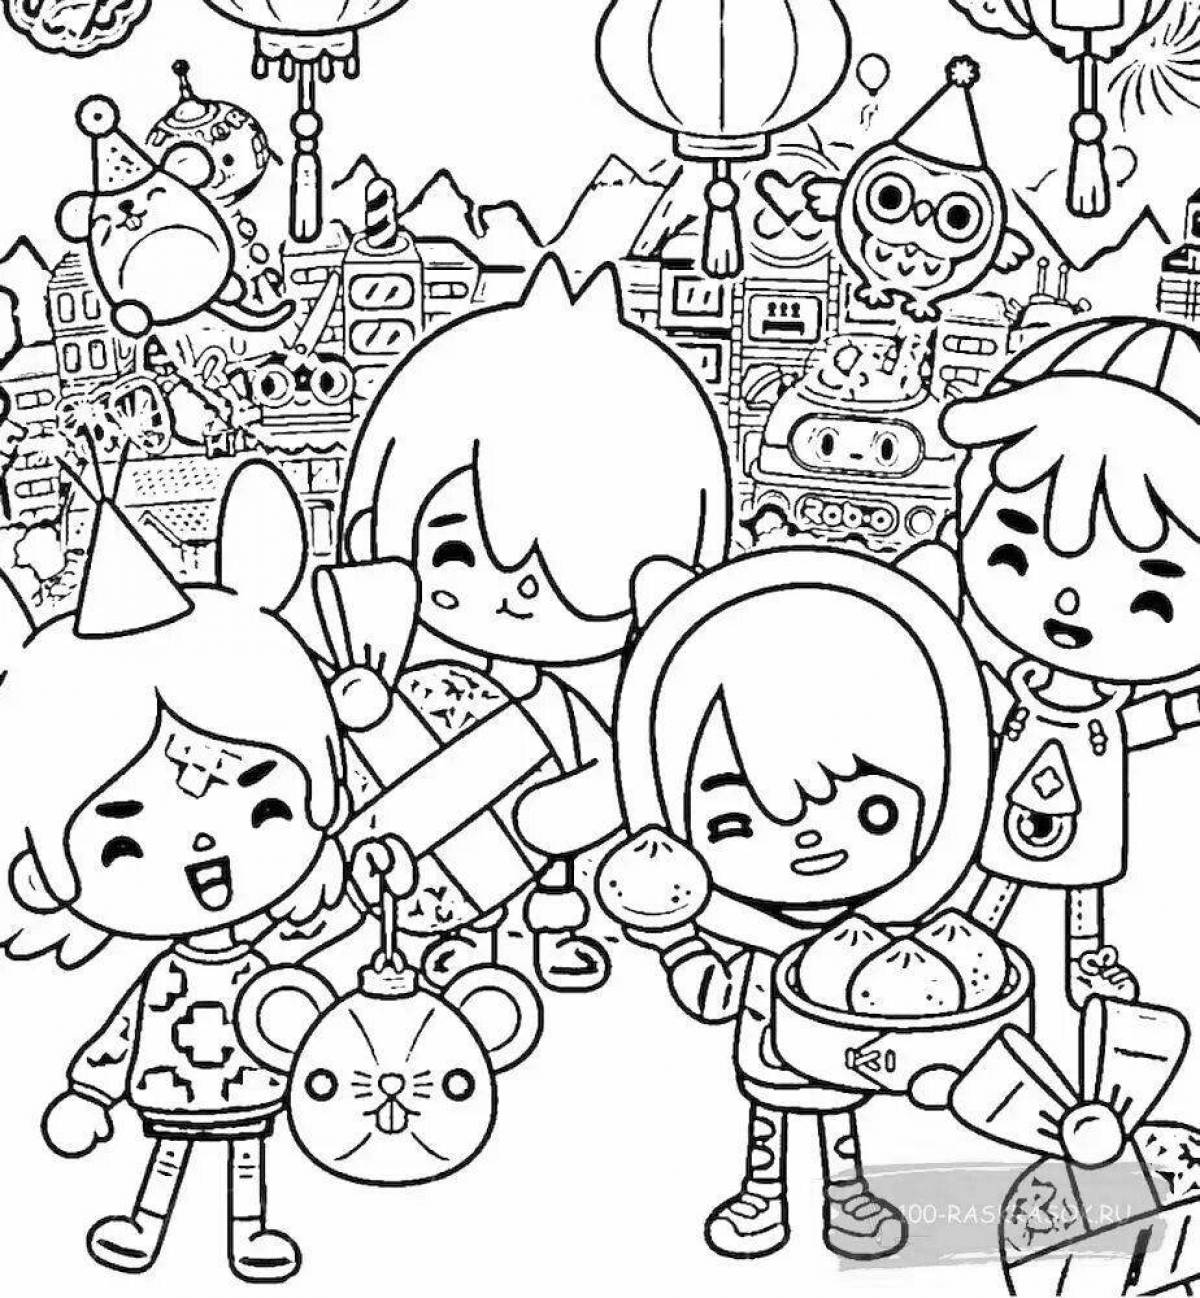 Colorful coloring page of the current side